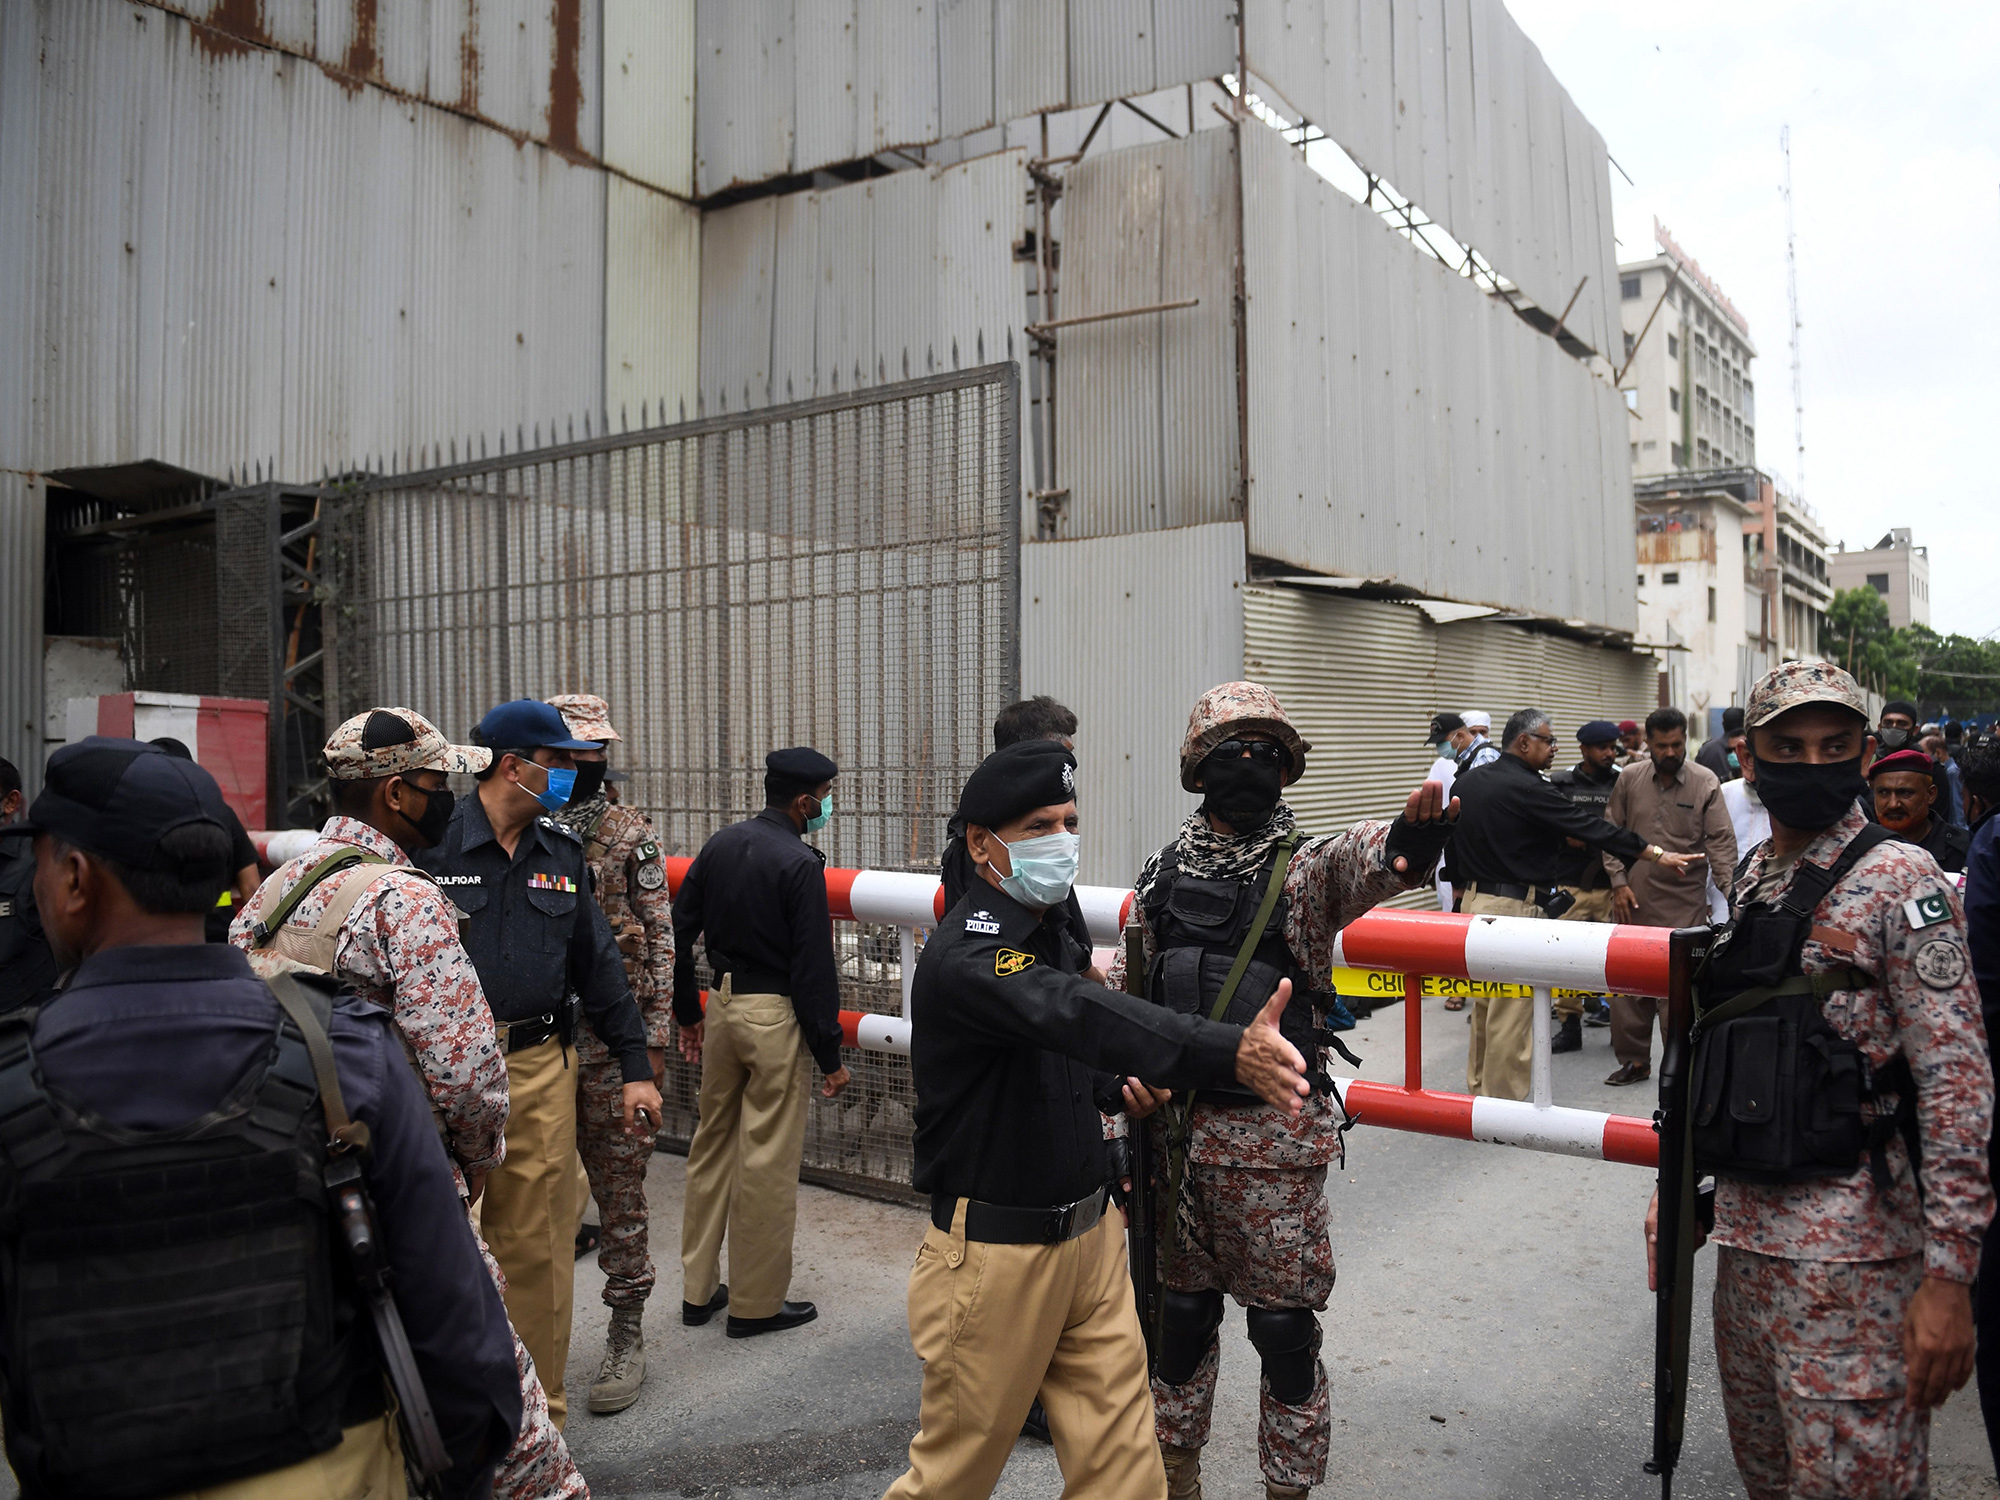 Security personnel gather at the main entrance of the Pakistan Stock Exchange building in Karachi, Pakistan, on June 29.